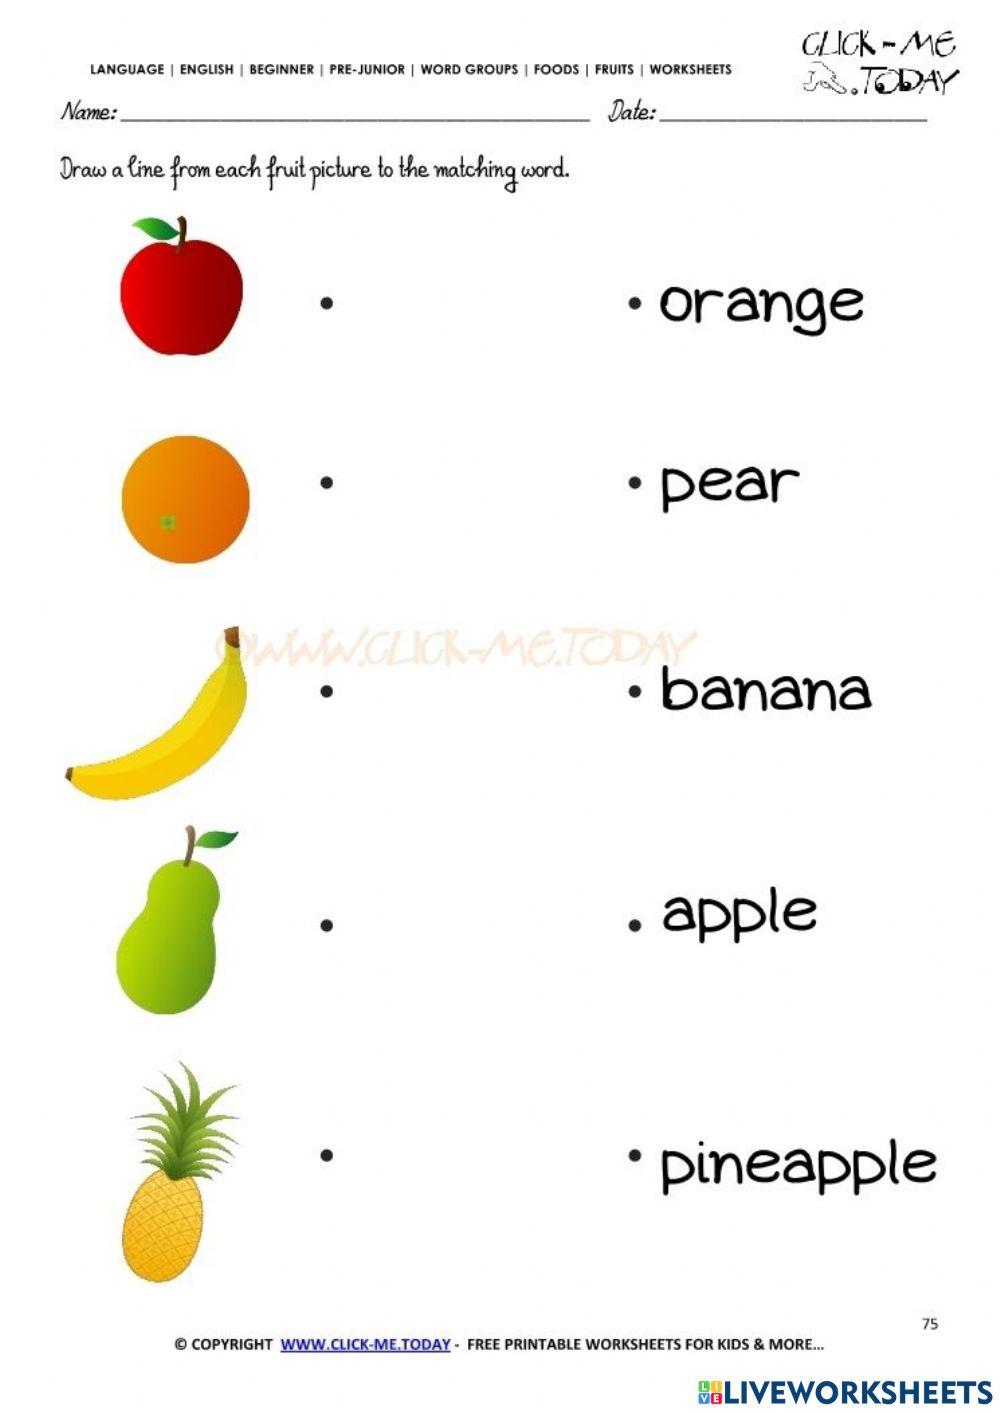 Name of fruits